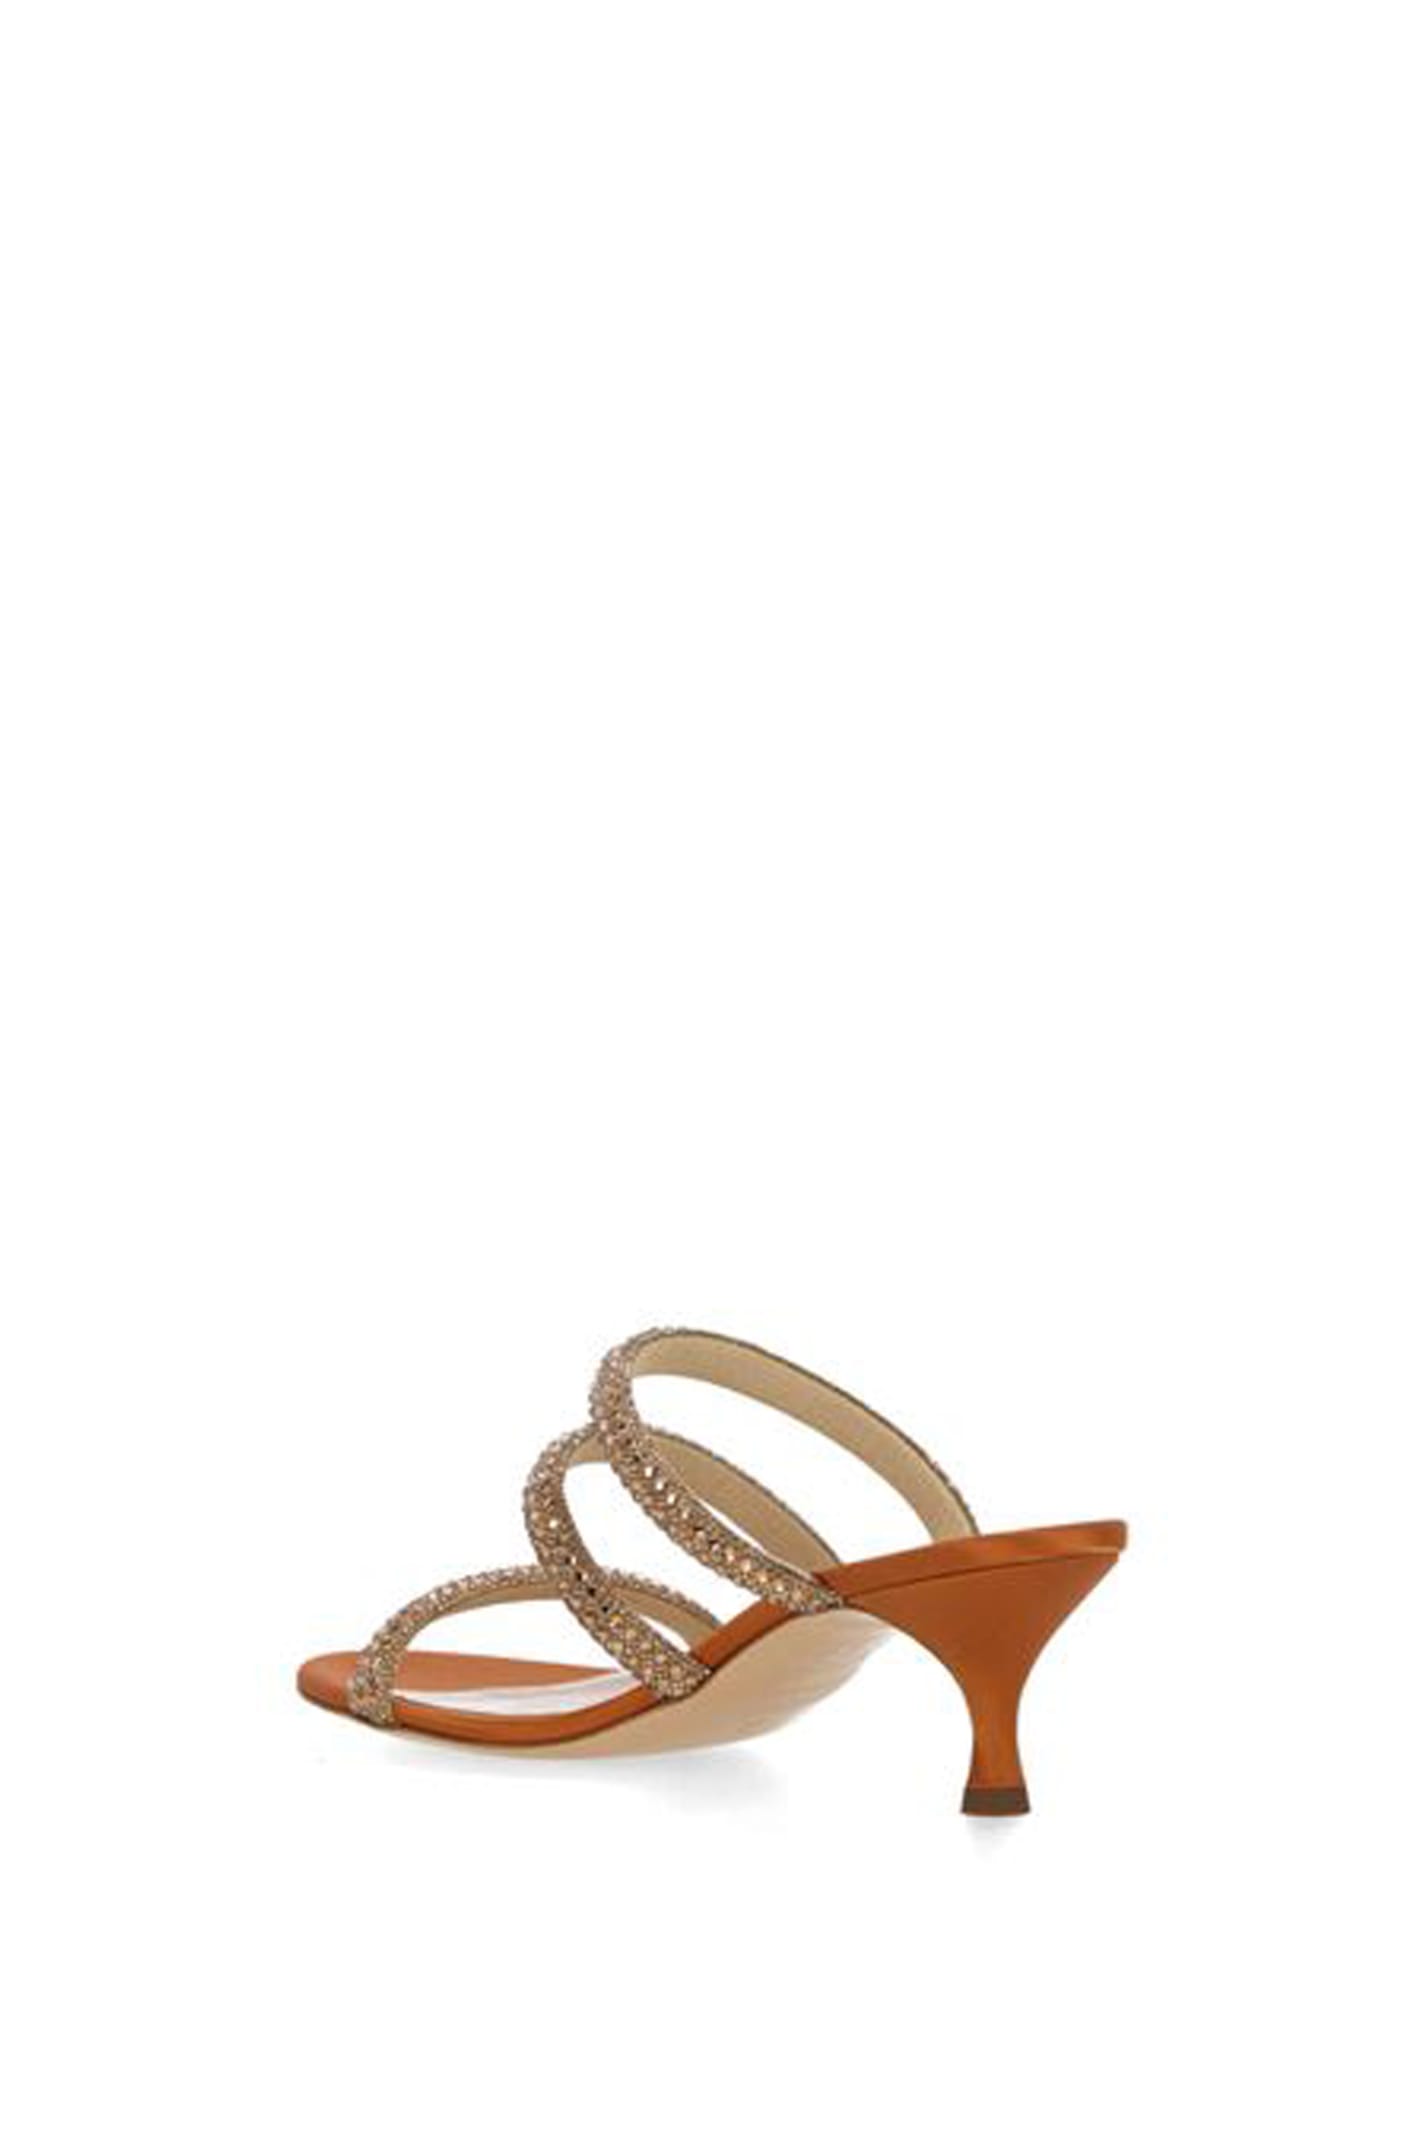 Shop Casadei Shoes With Heels In Honey Natur